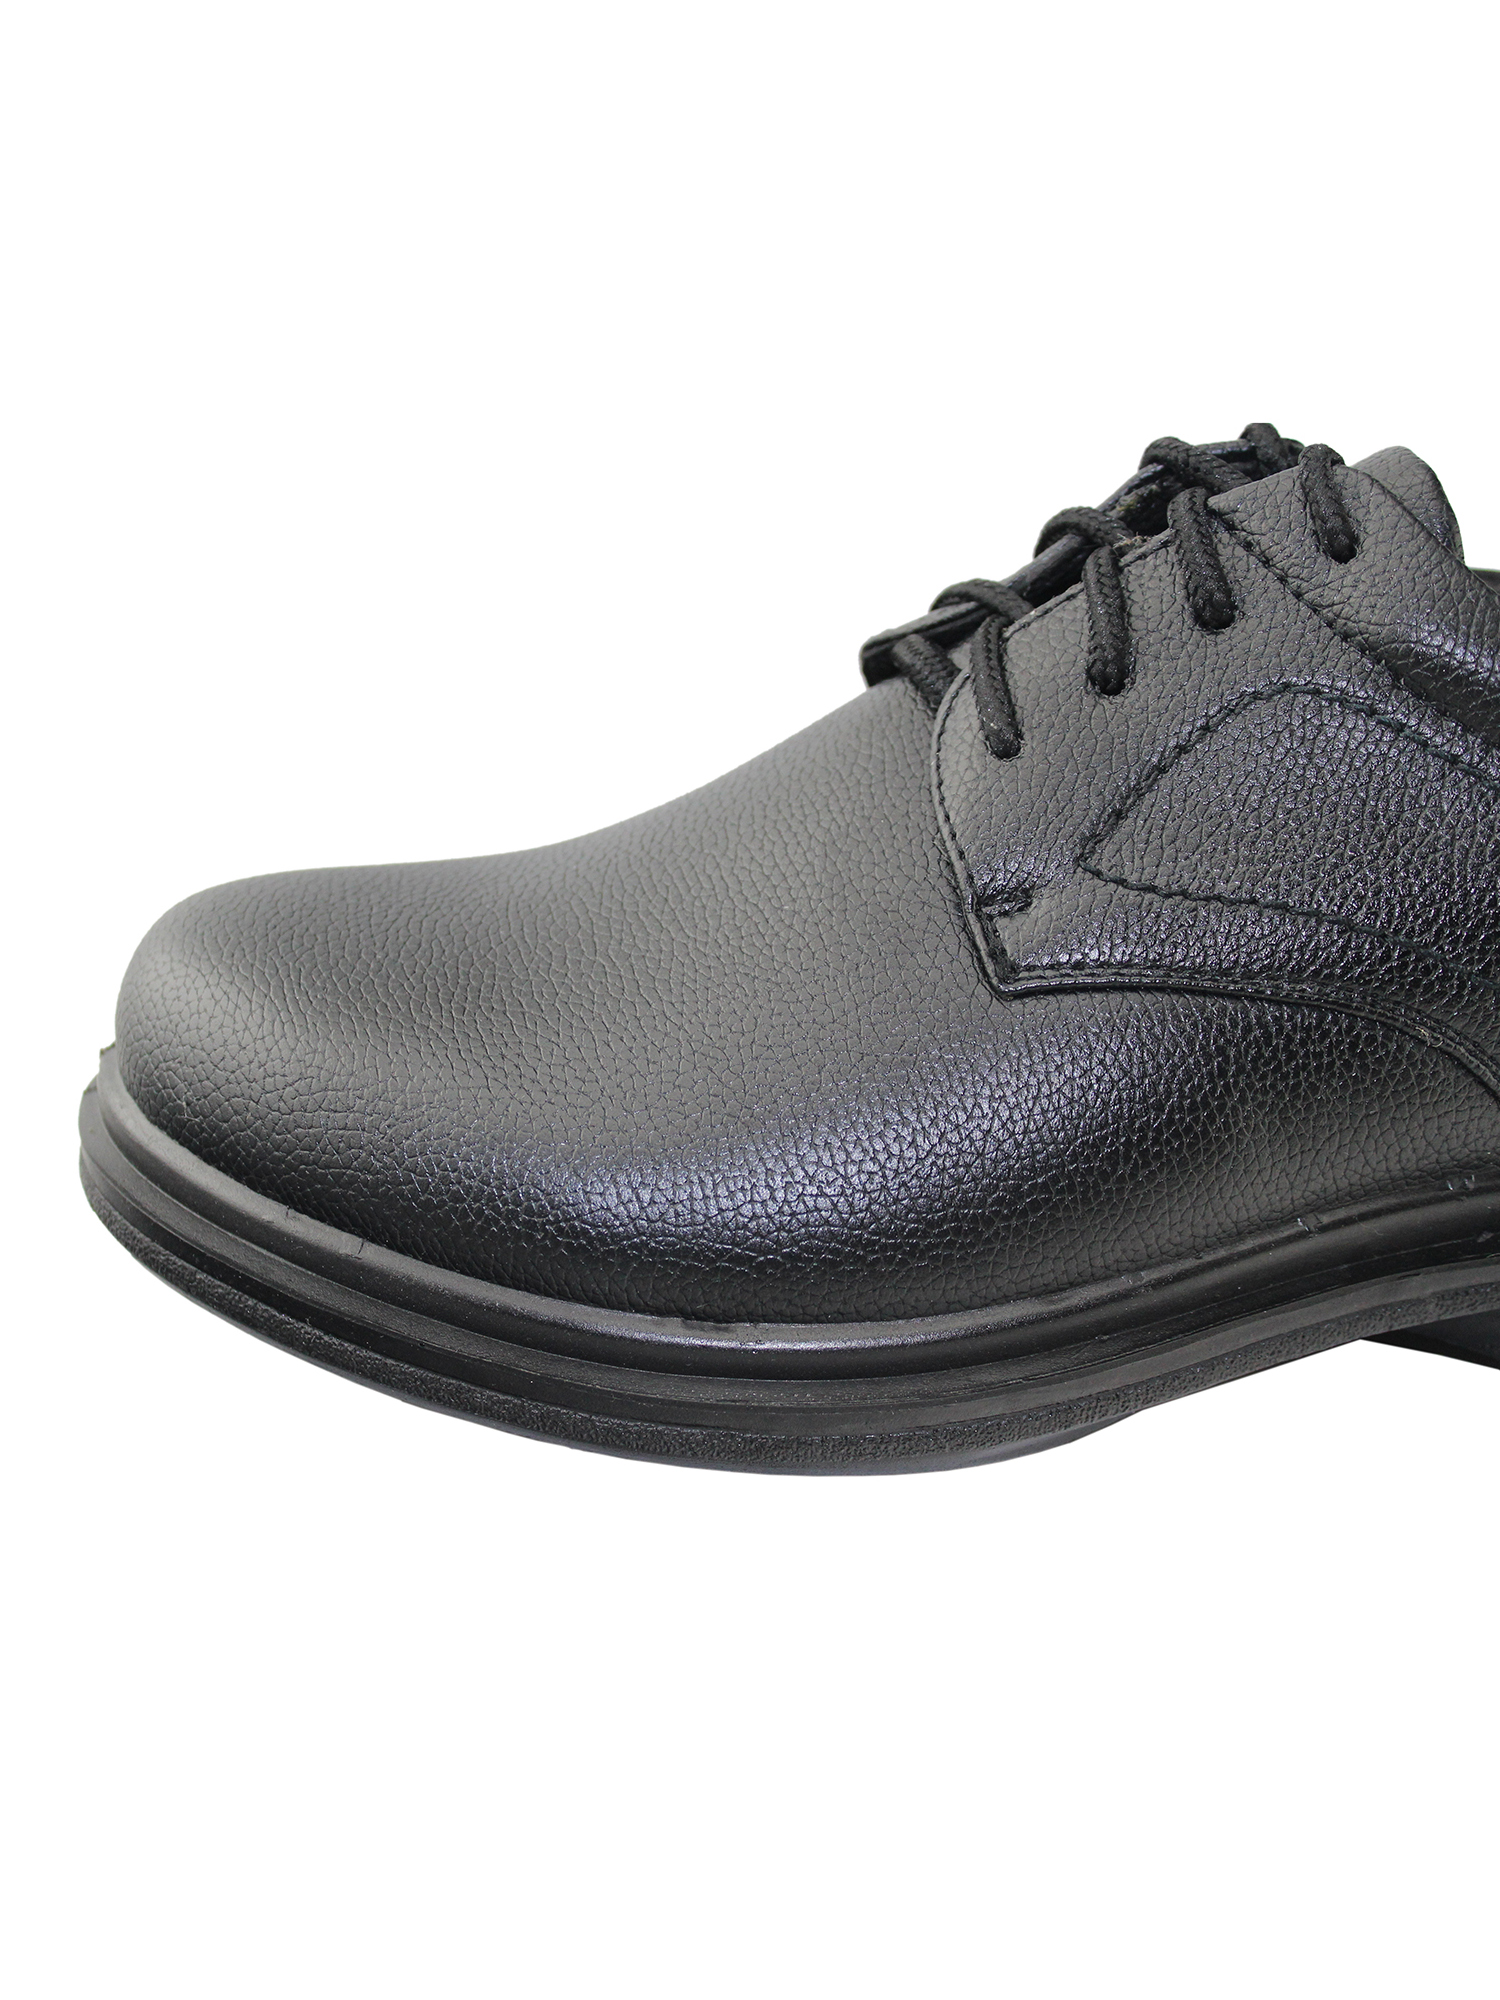 Mens Lightweight Non-Slip And Oil Resistant Shoes Autumn Winter Comfortable Air-Cushioning Casual Shoes - image 4 of 5